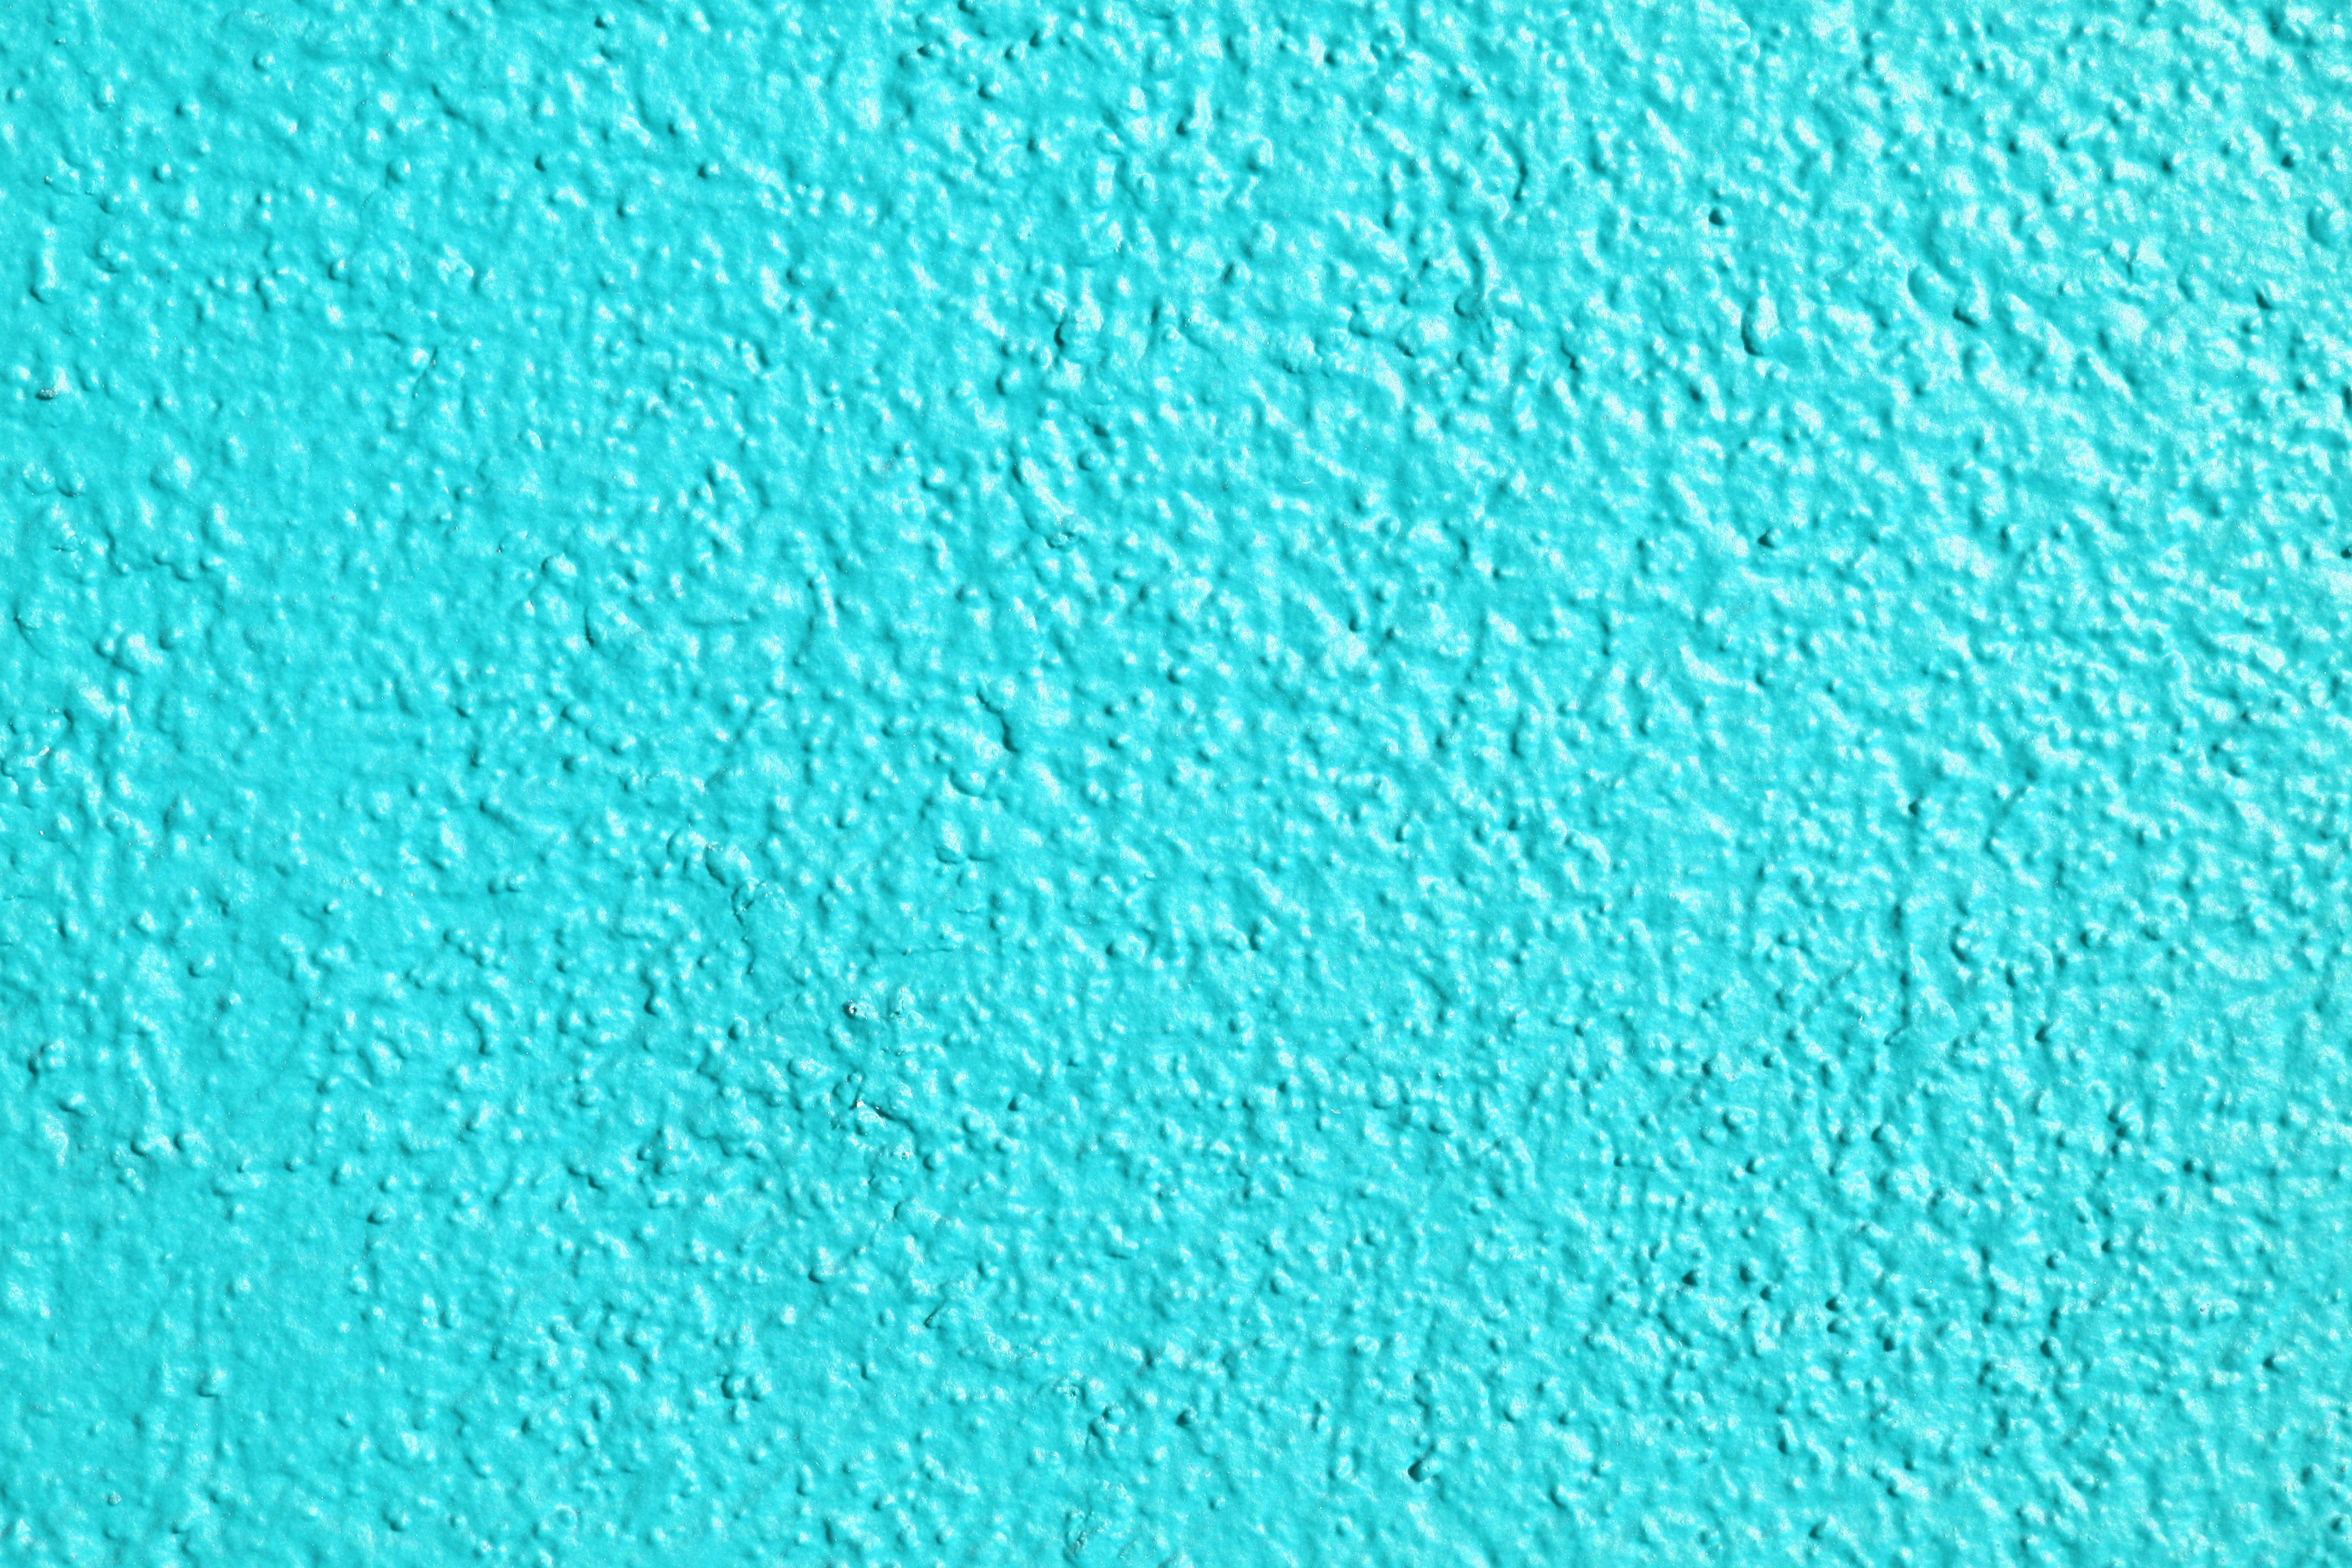 Teal Painted Wall Texture Picture Photograph Photos Public